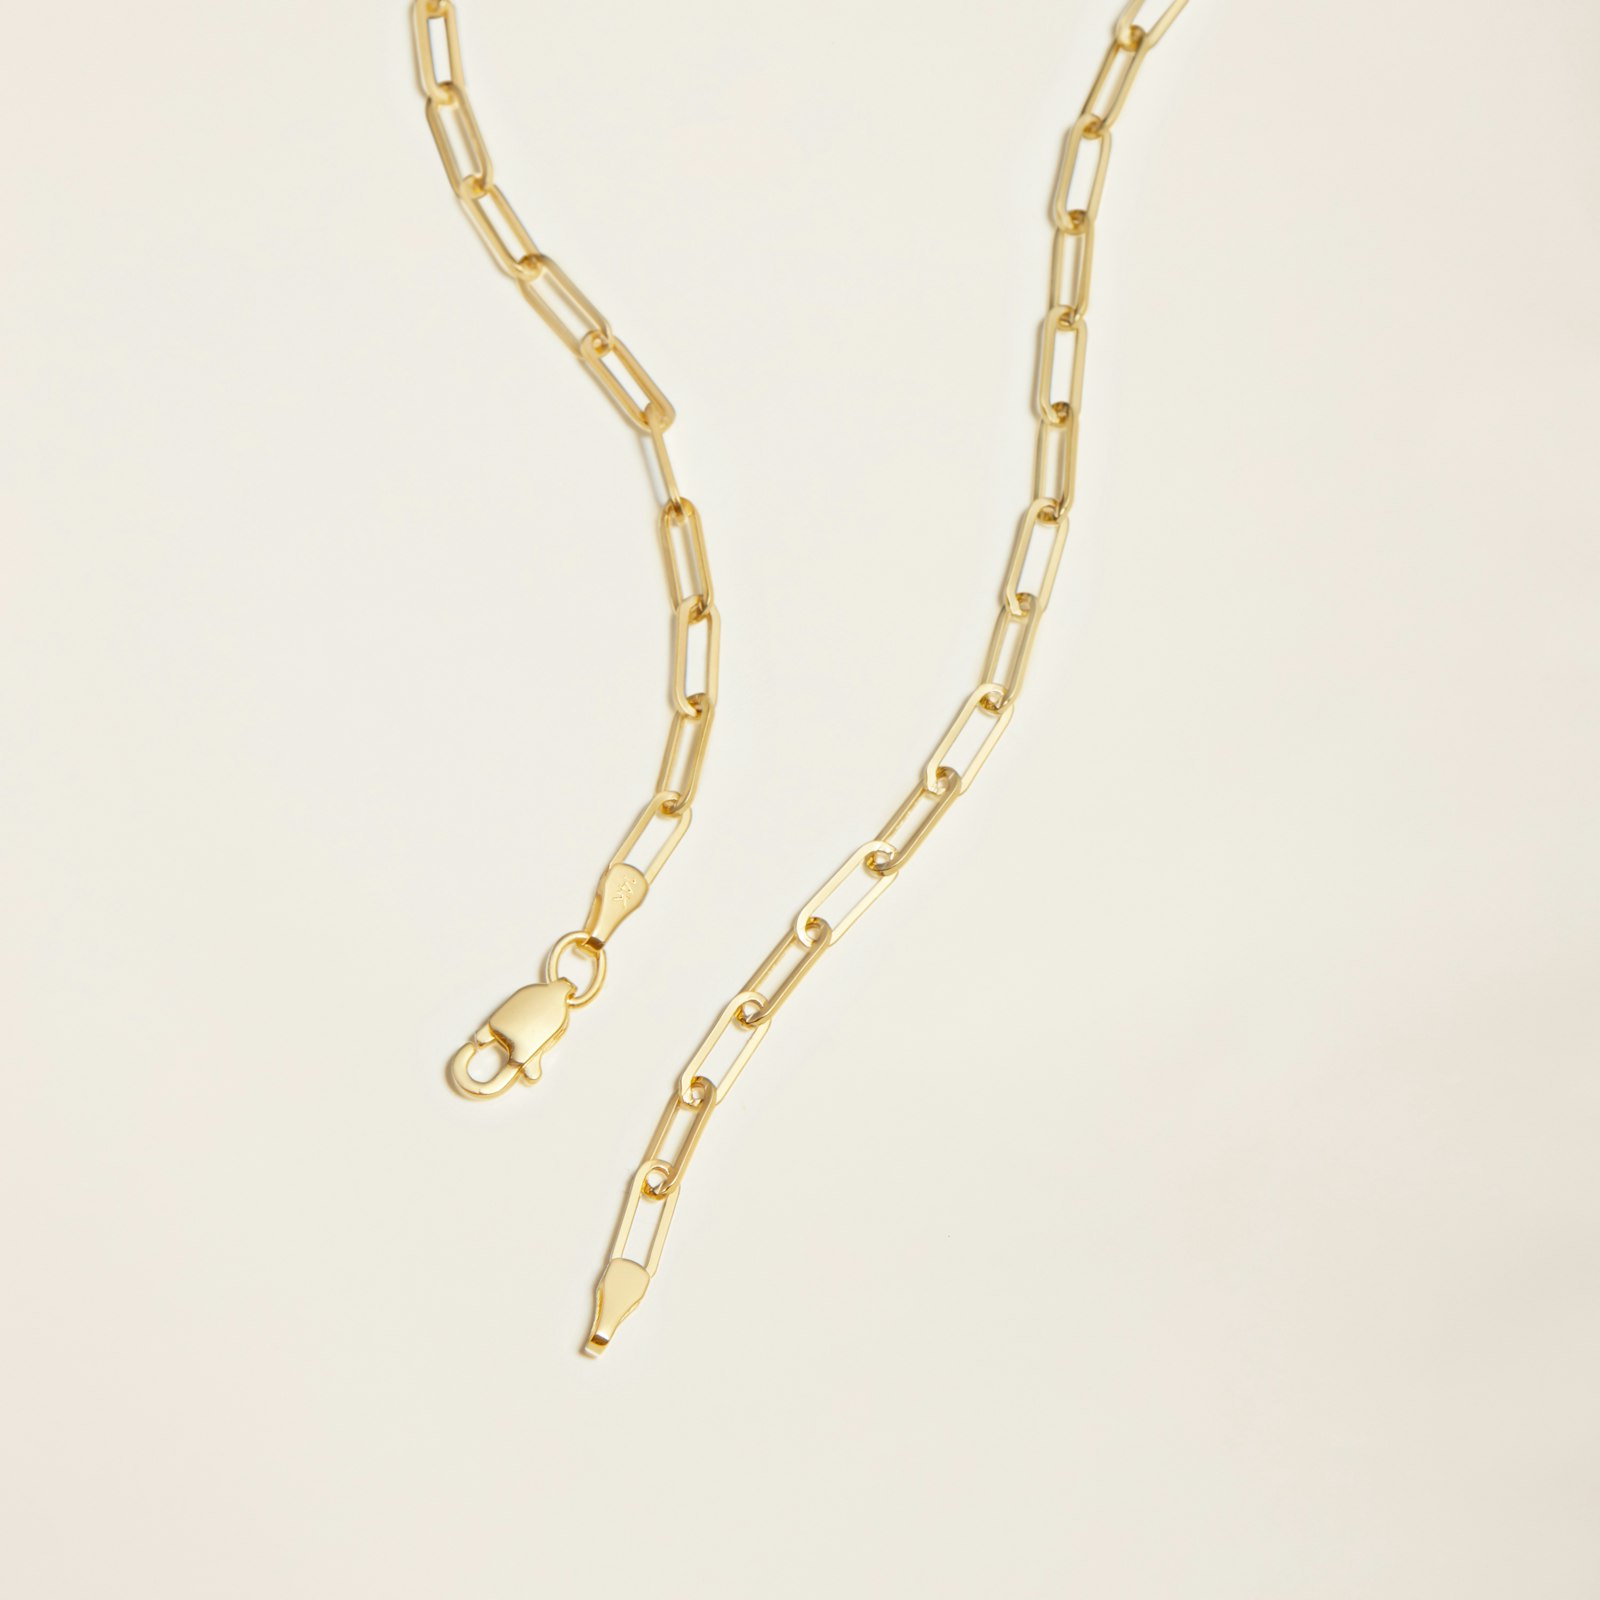 14K Gold Paperclip Chain Necklace - 16__A_6376_Edited.jpg